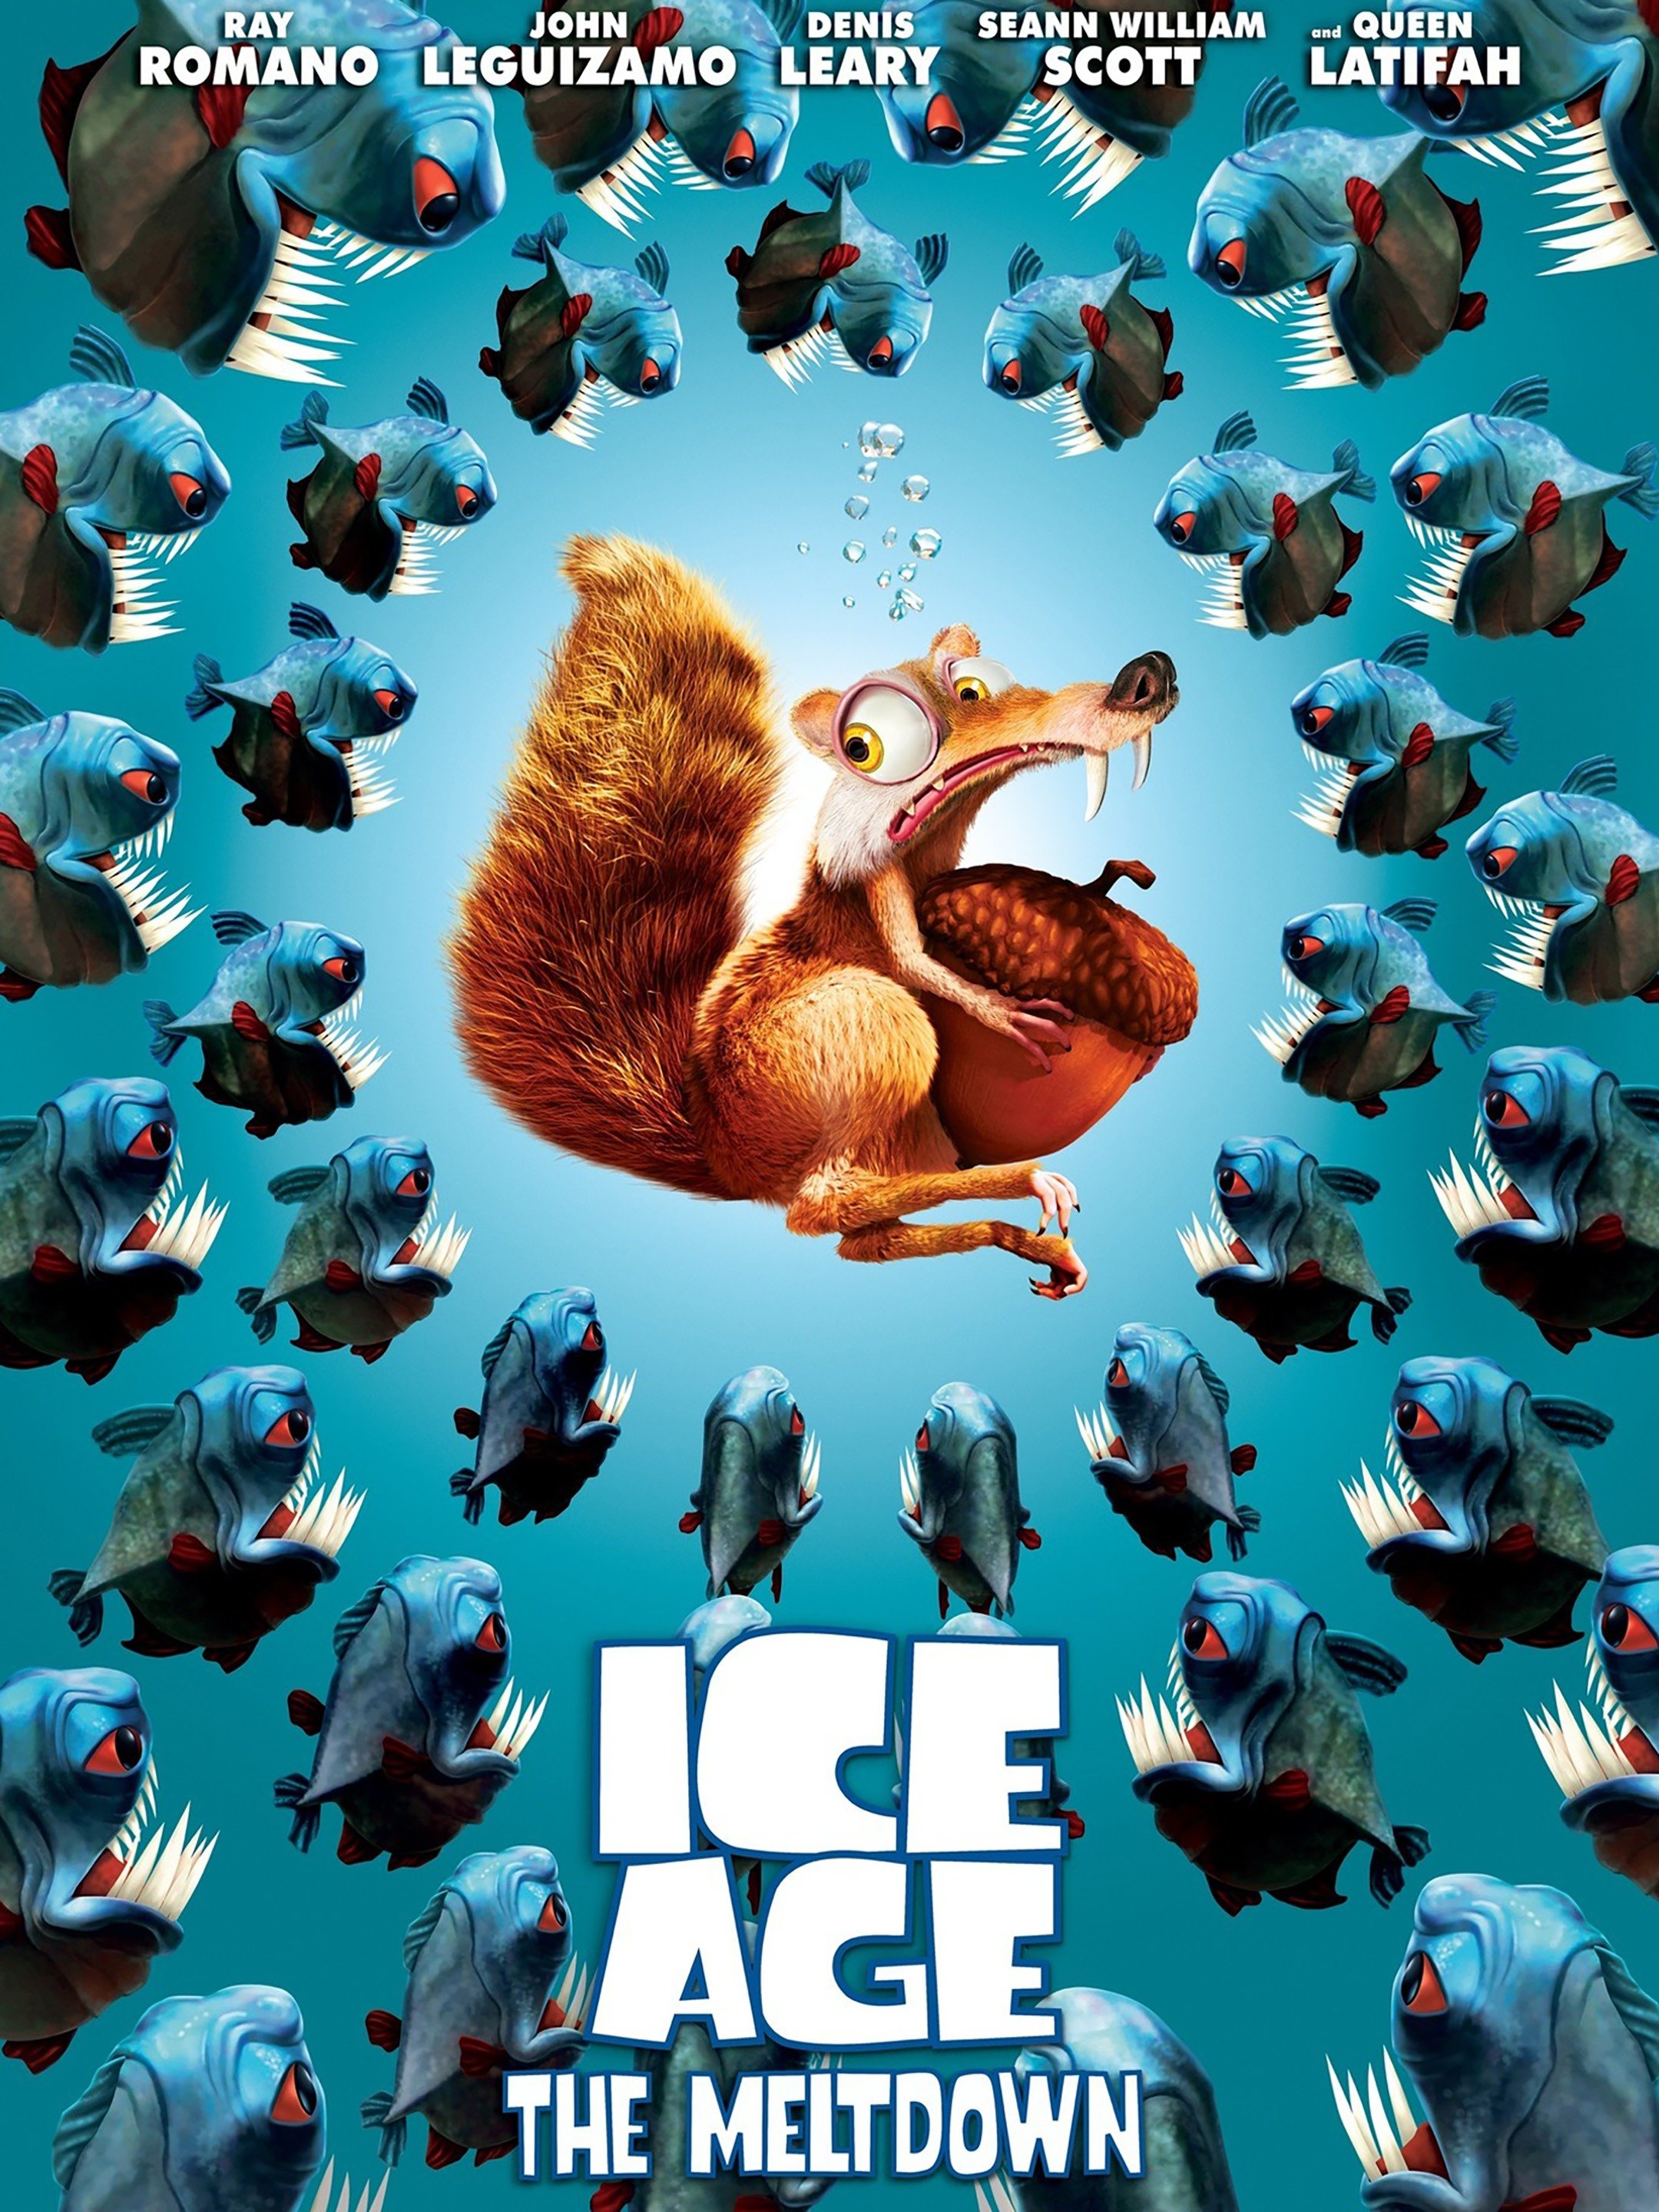 Animated film ice age in tamil - calimzaer